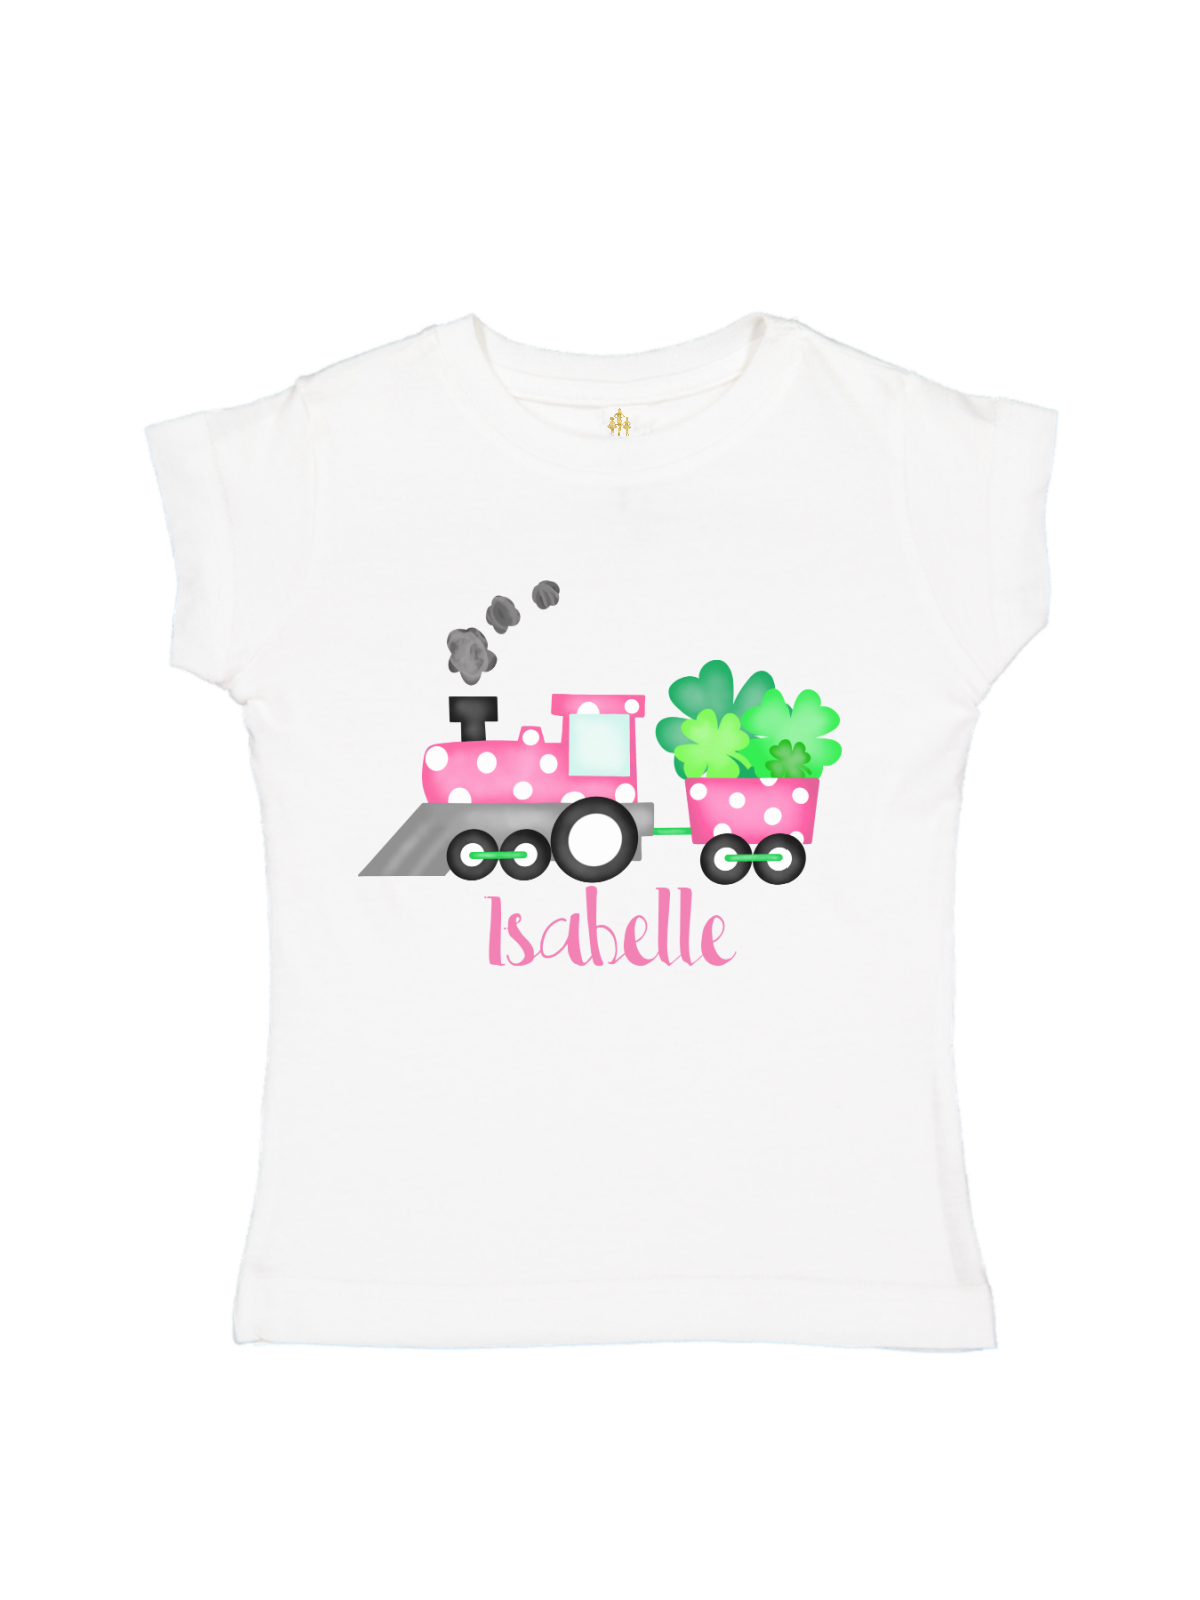 Girls St. Patrick's Day Train Shirt in Long Sleeve